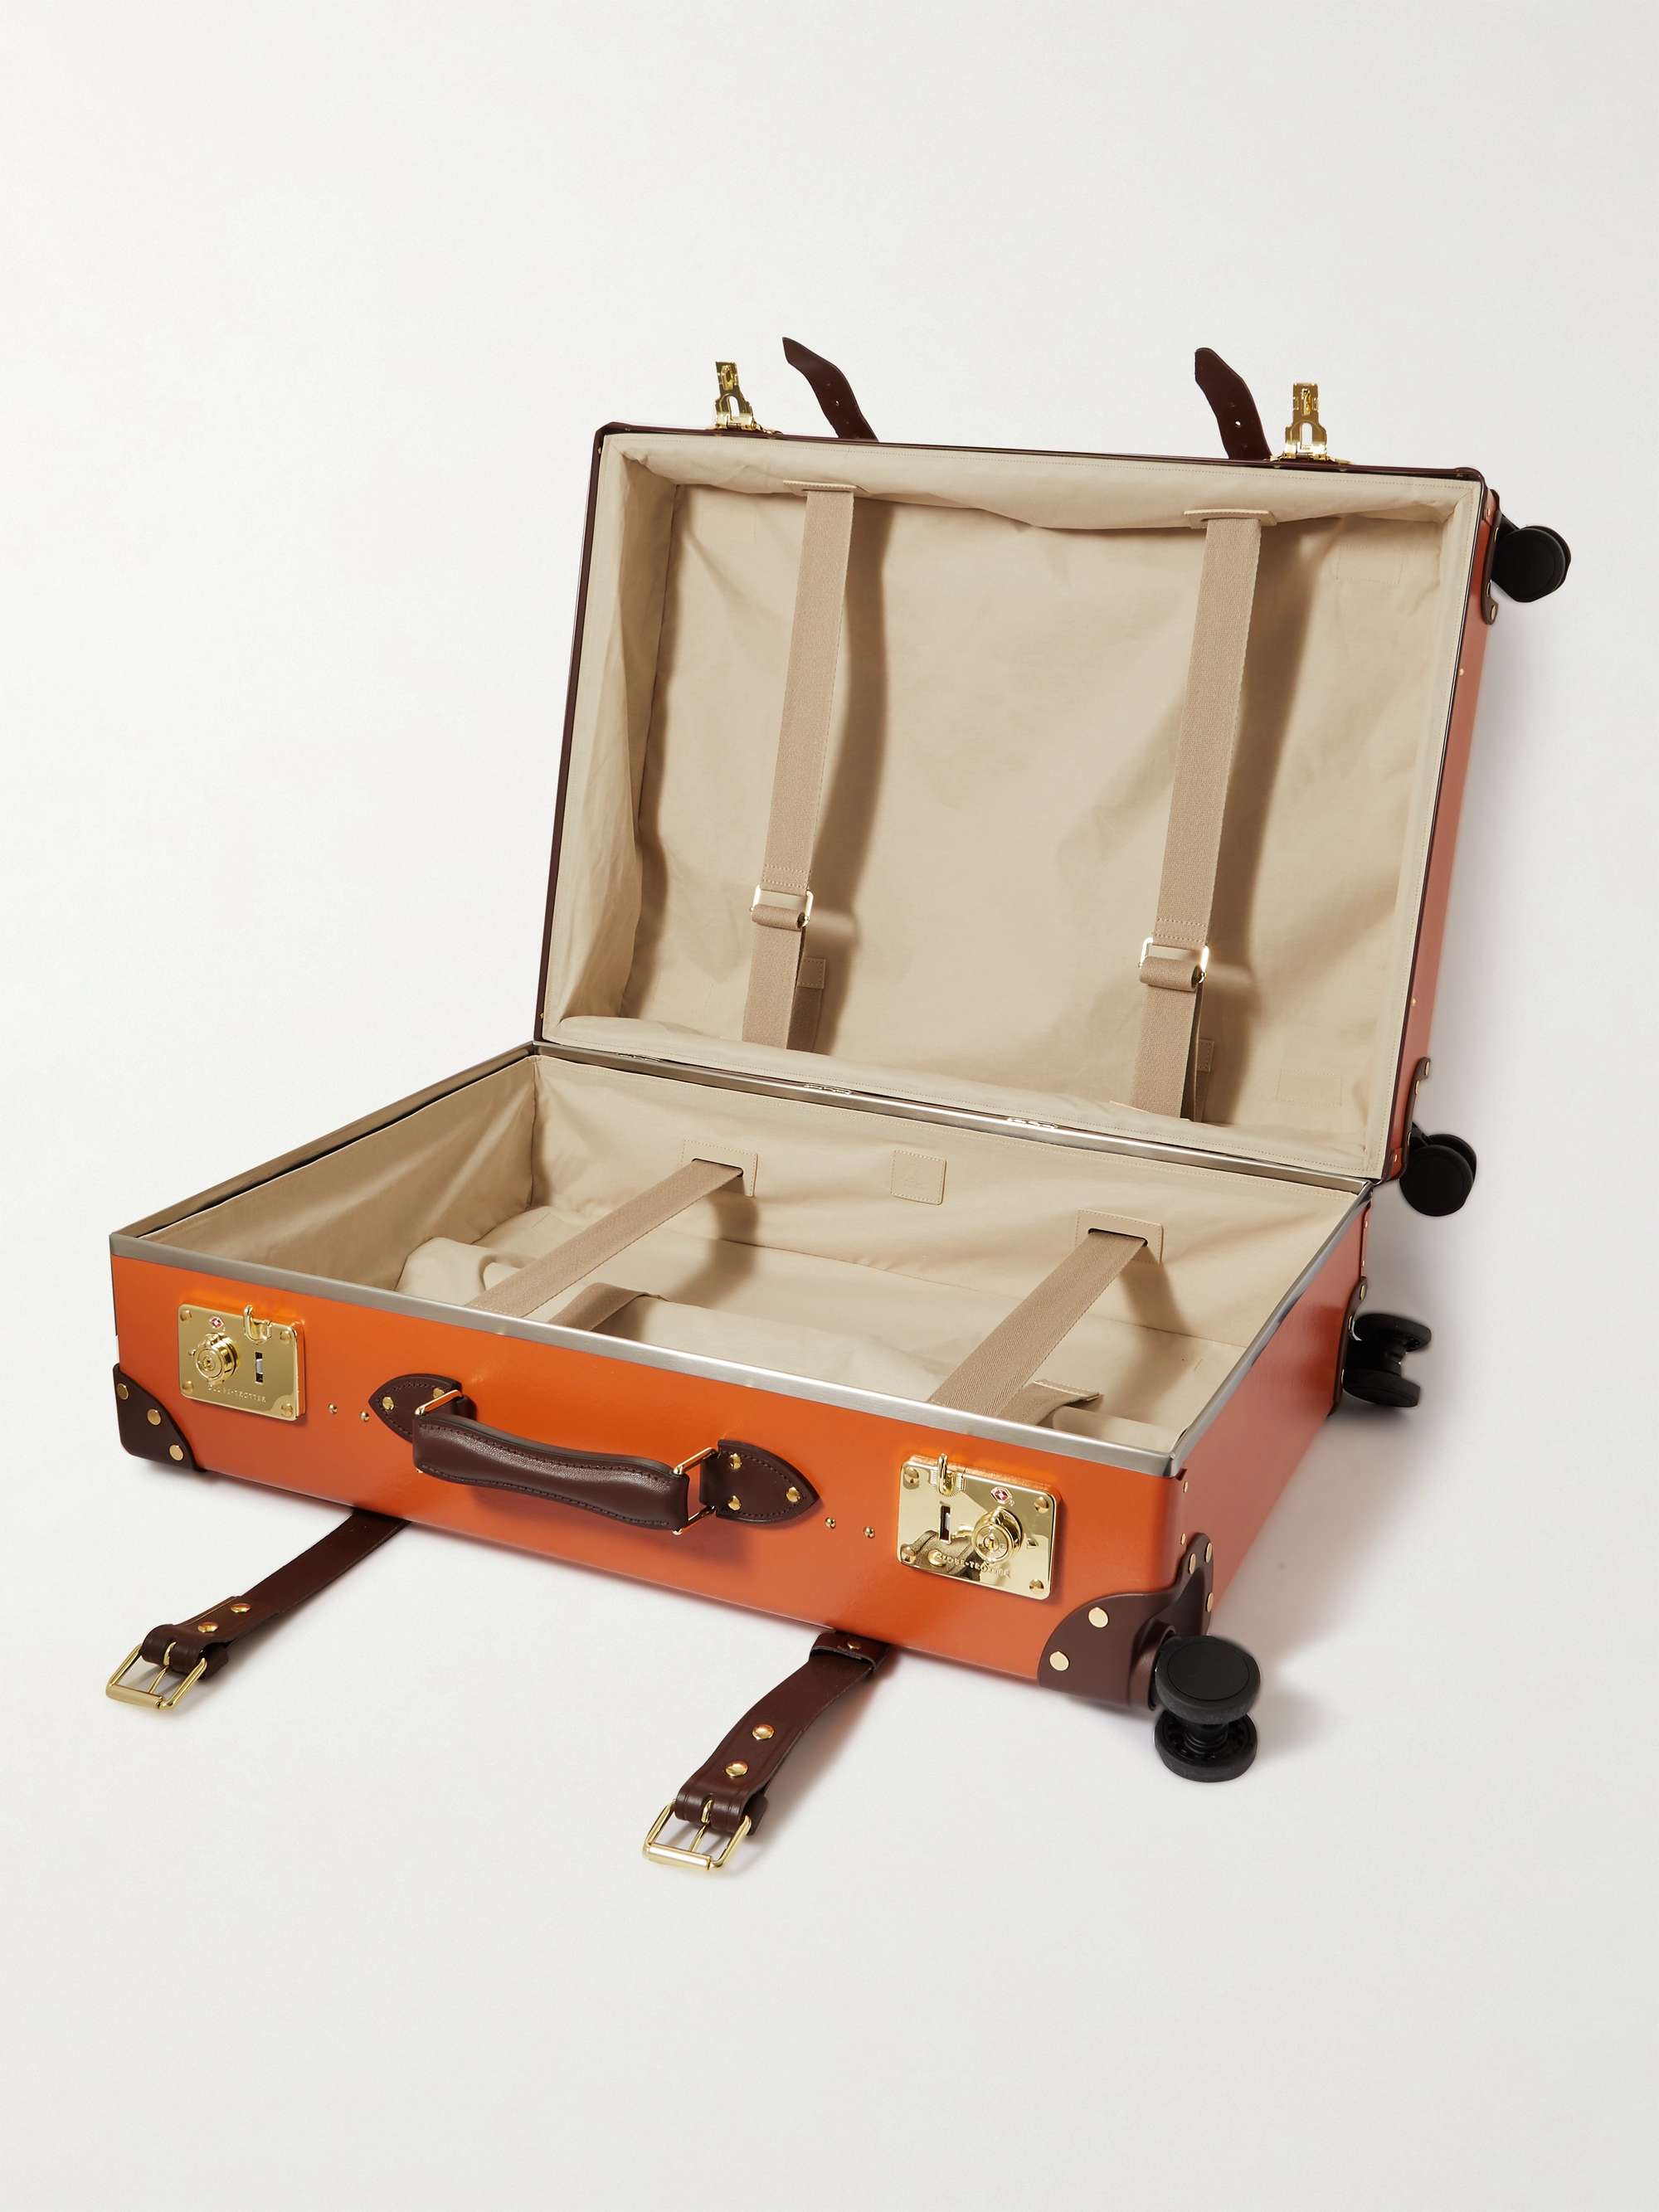 GLOBE-TROTTER Centenary Check-In Leather-Trimmed Trolley Suitcase